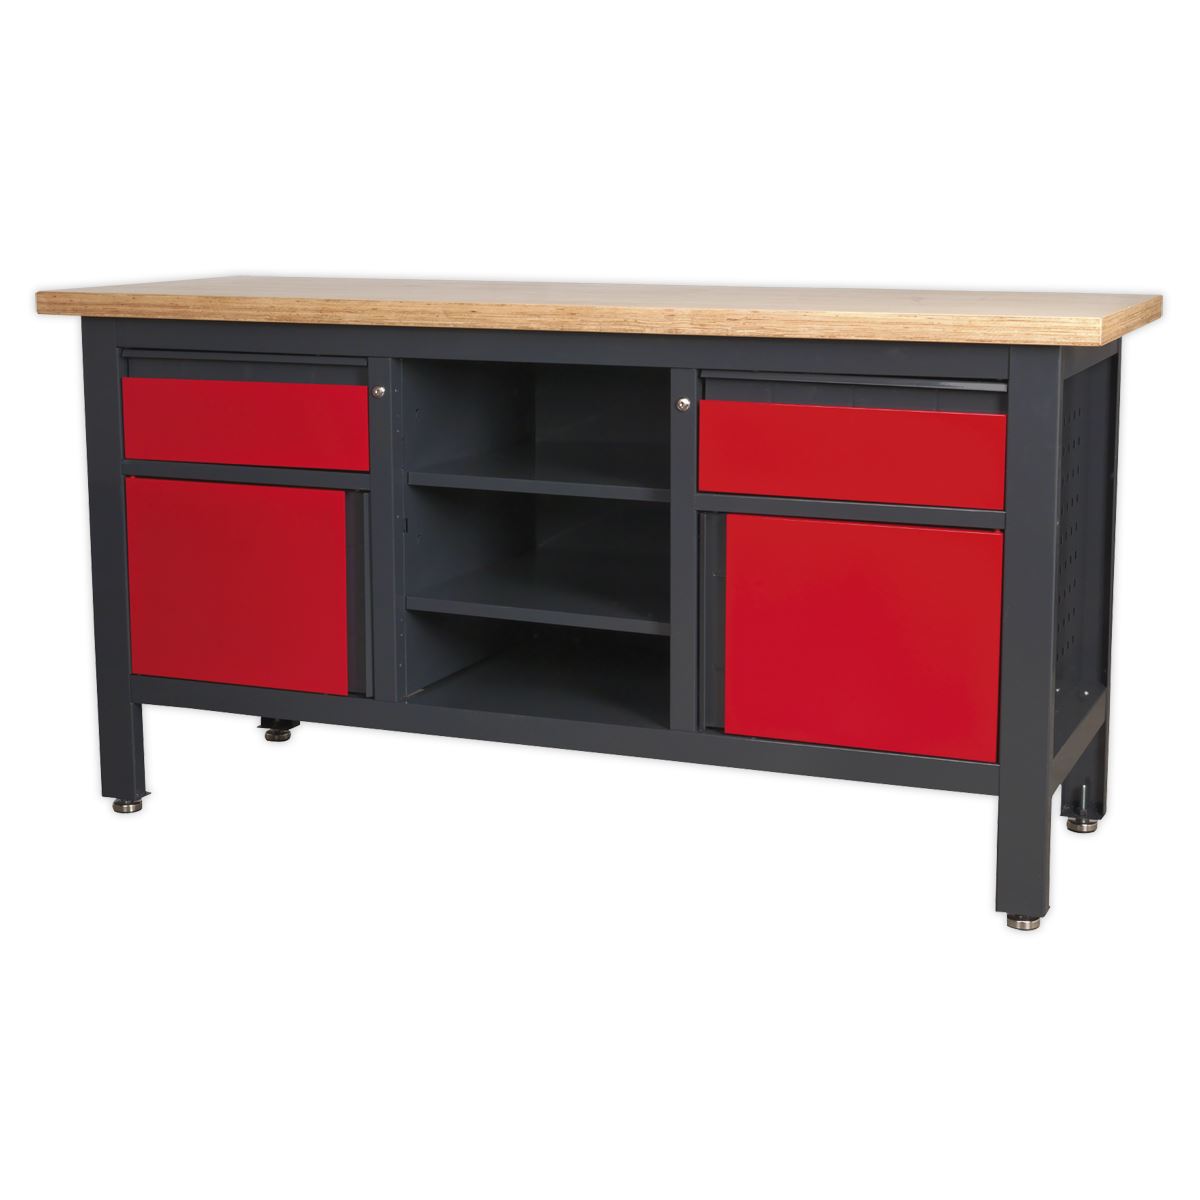 Sealey Workstation with 2 Drawers, 2 Cupboards & Open Storage